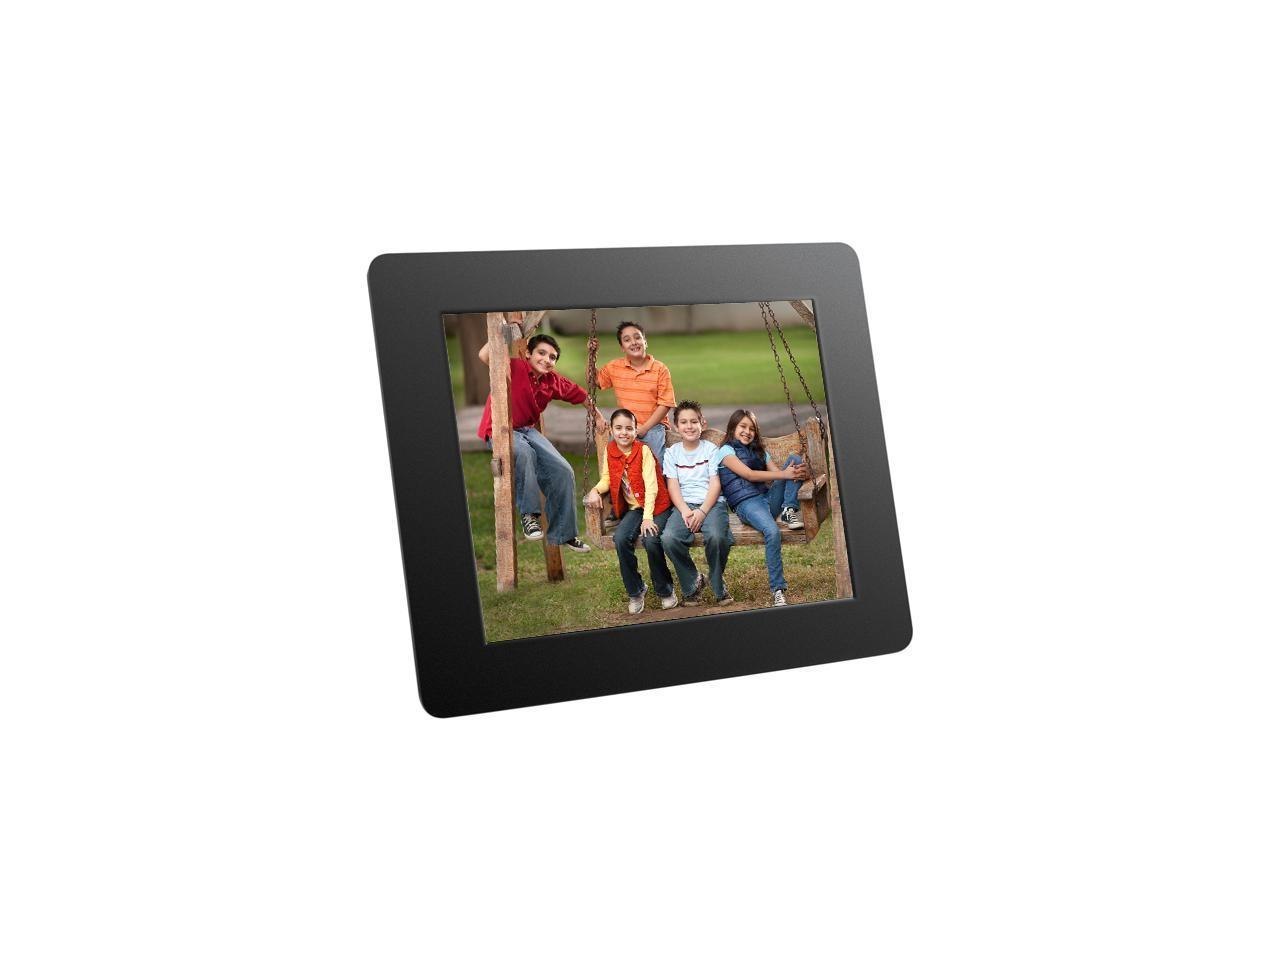 Aluratek Adpf08sf 8" 800 X 600 Digital Photo Frame With Auto Slideshow Feature